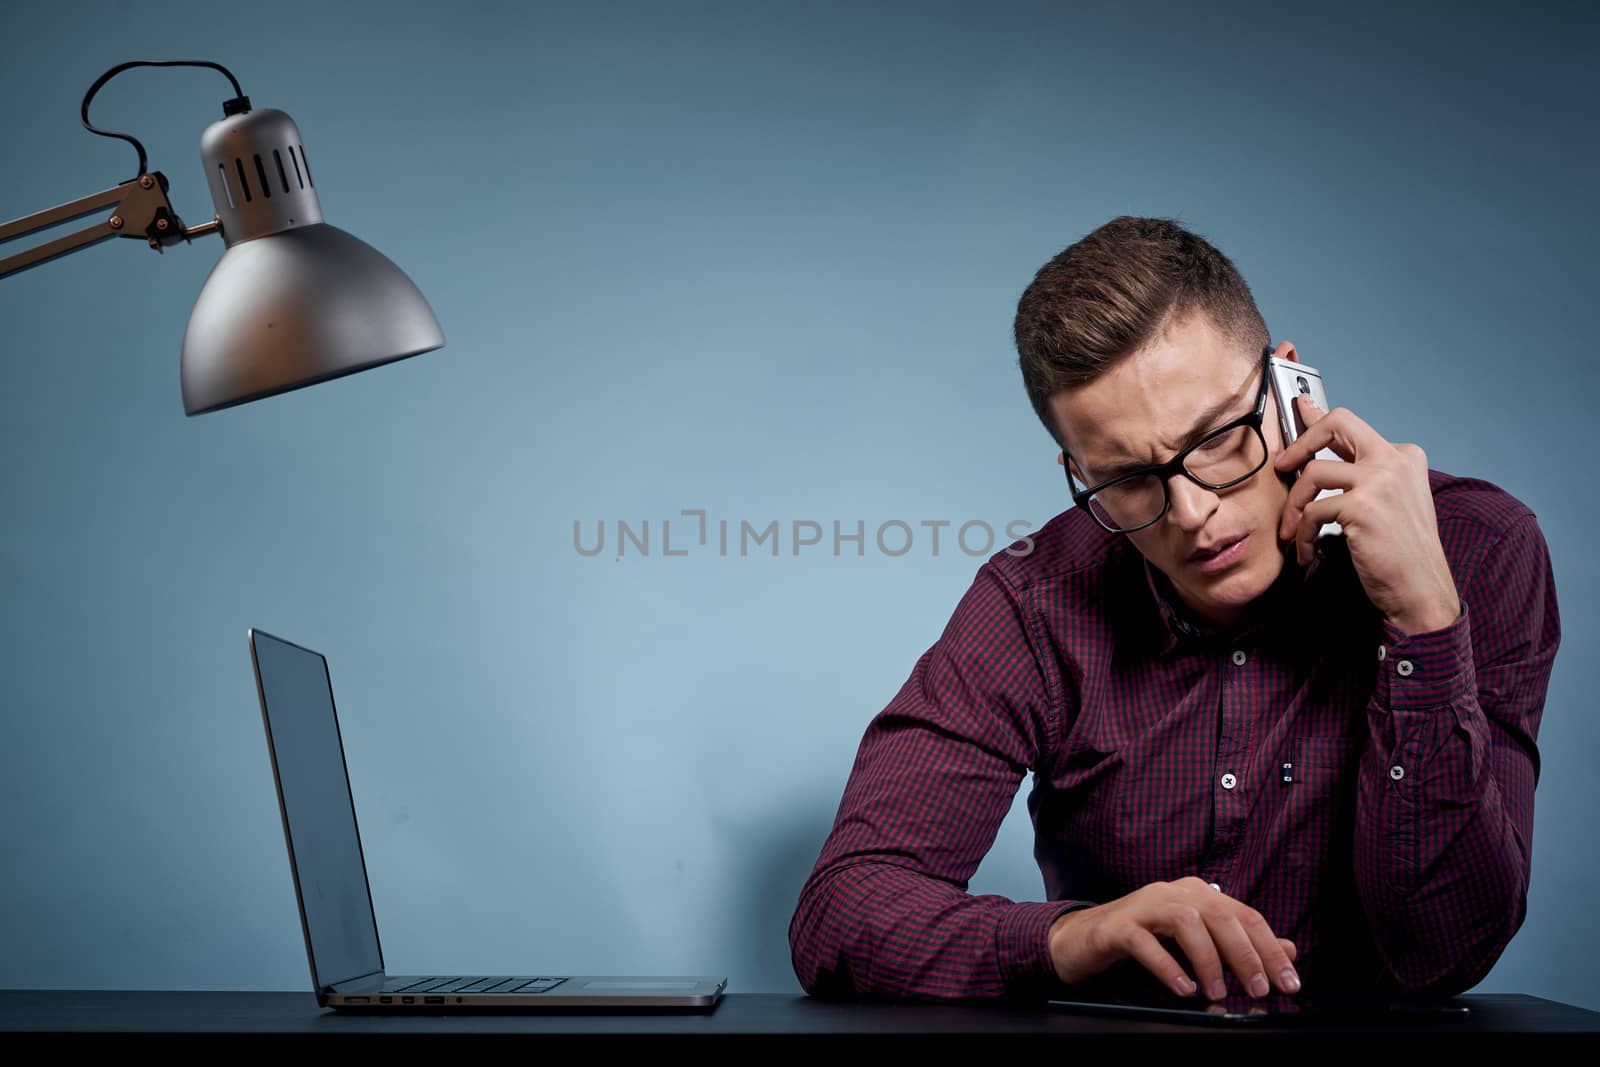 Business man talking on the phone in the office open laptop manager communication model. High quality photo